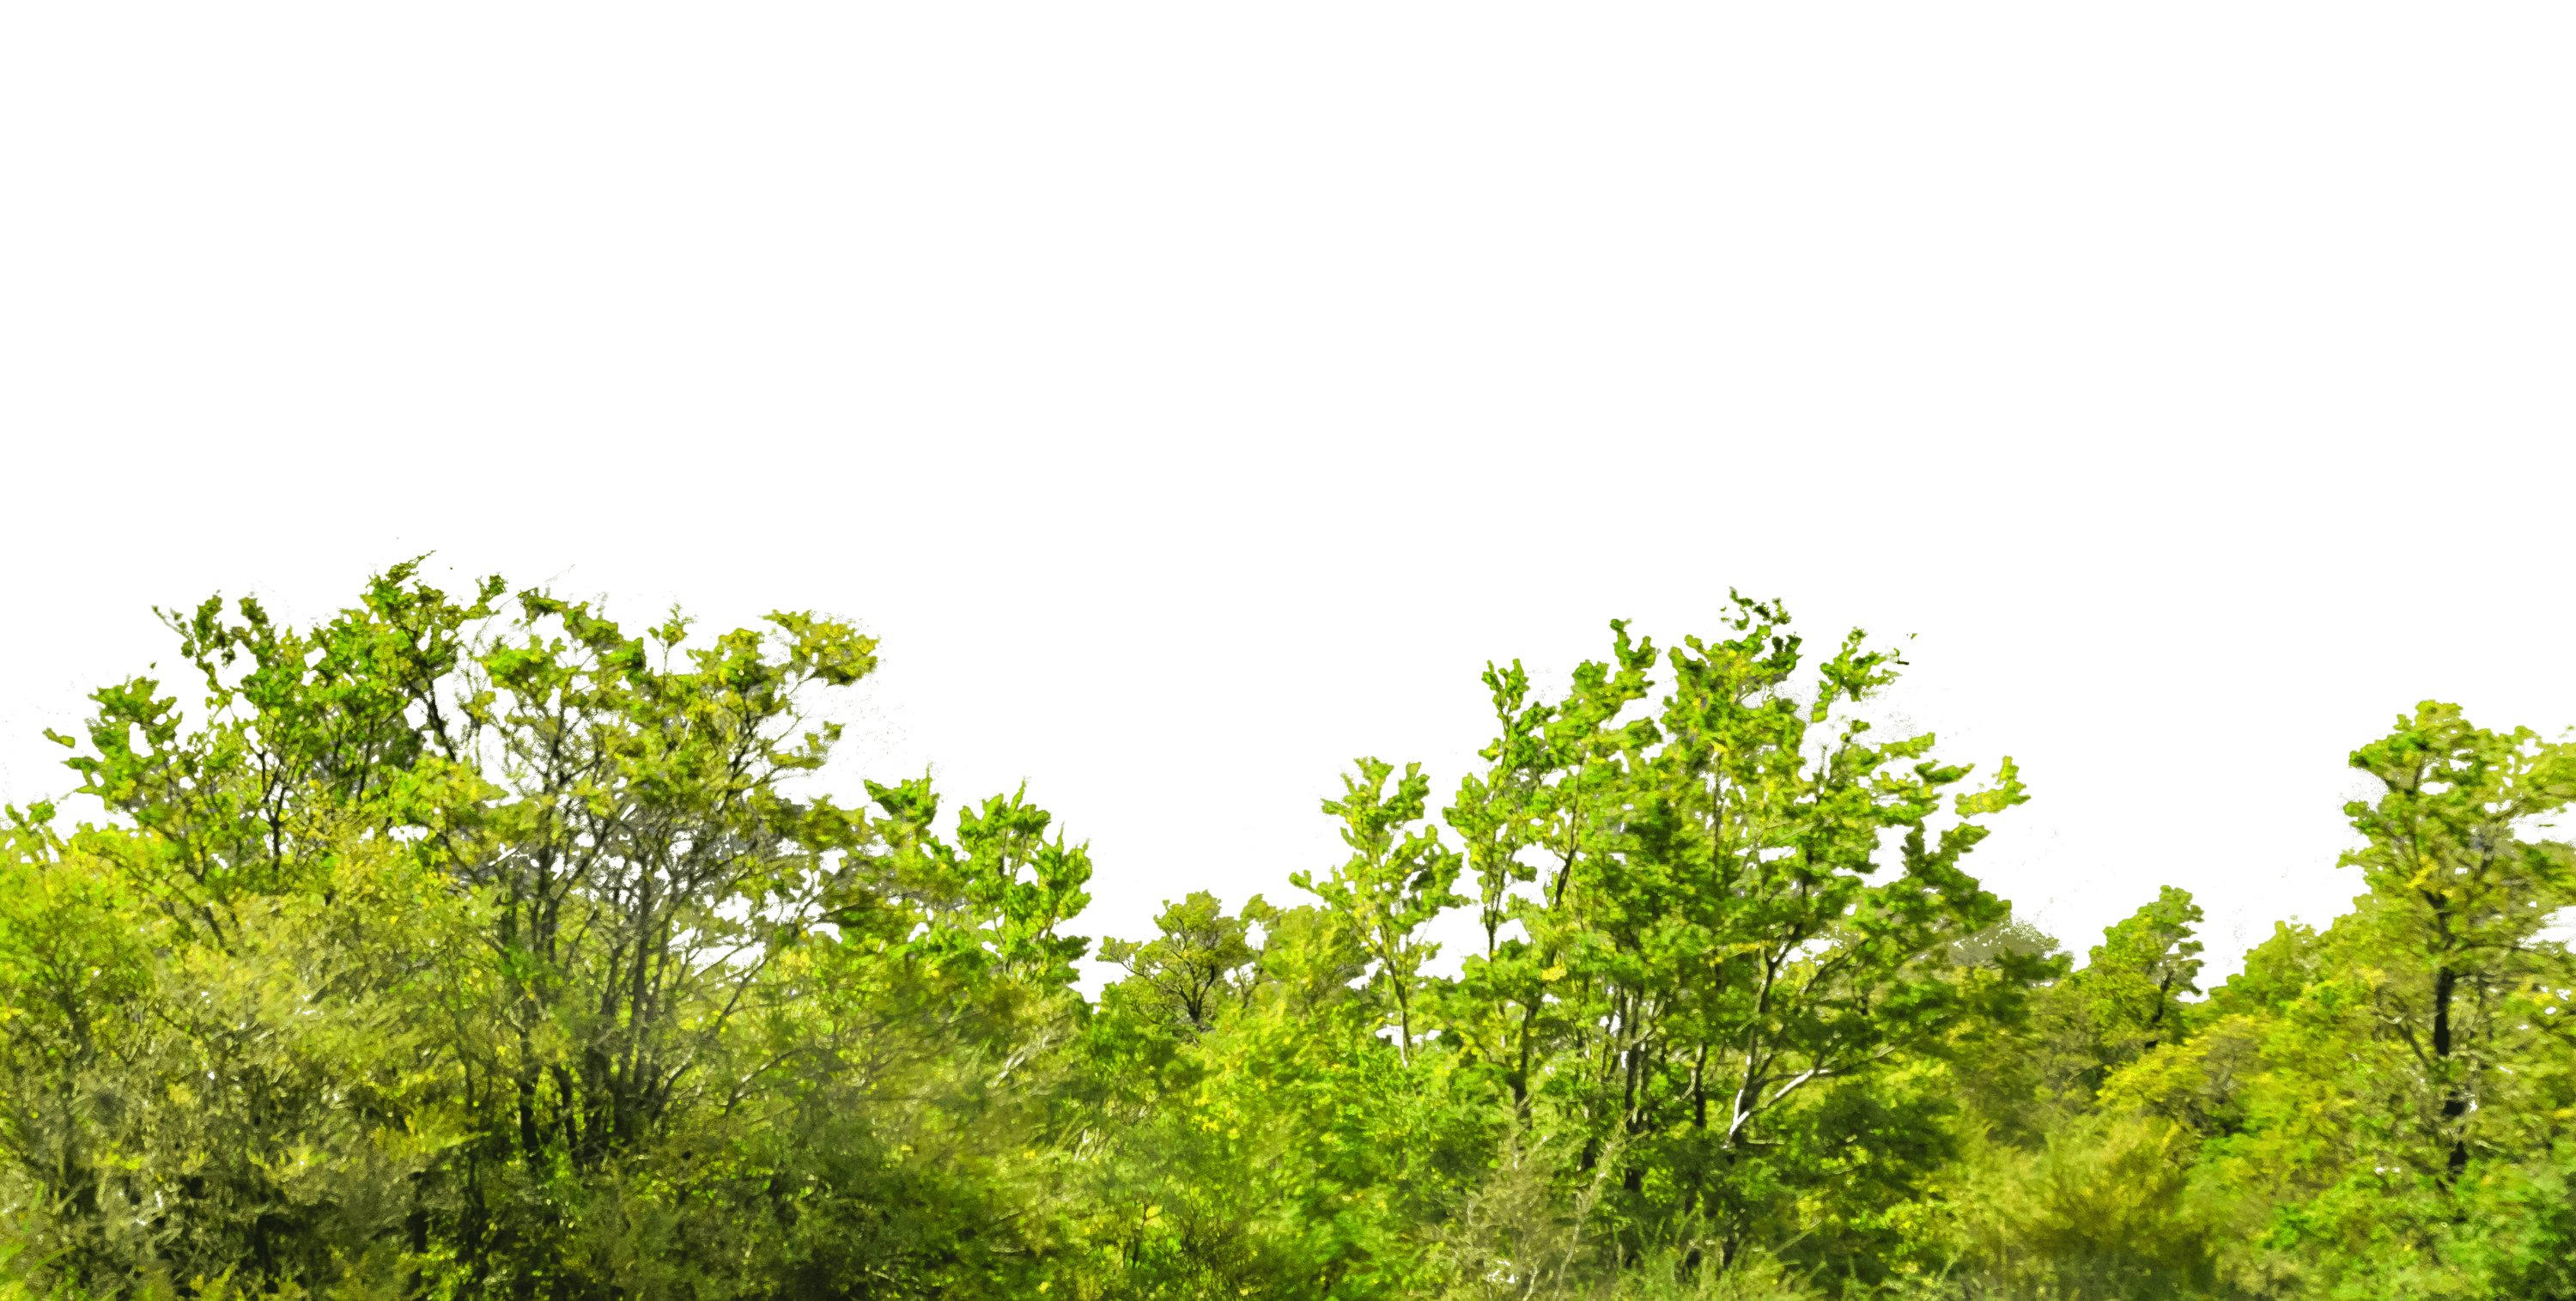 A row of lucious green trees